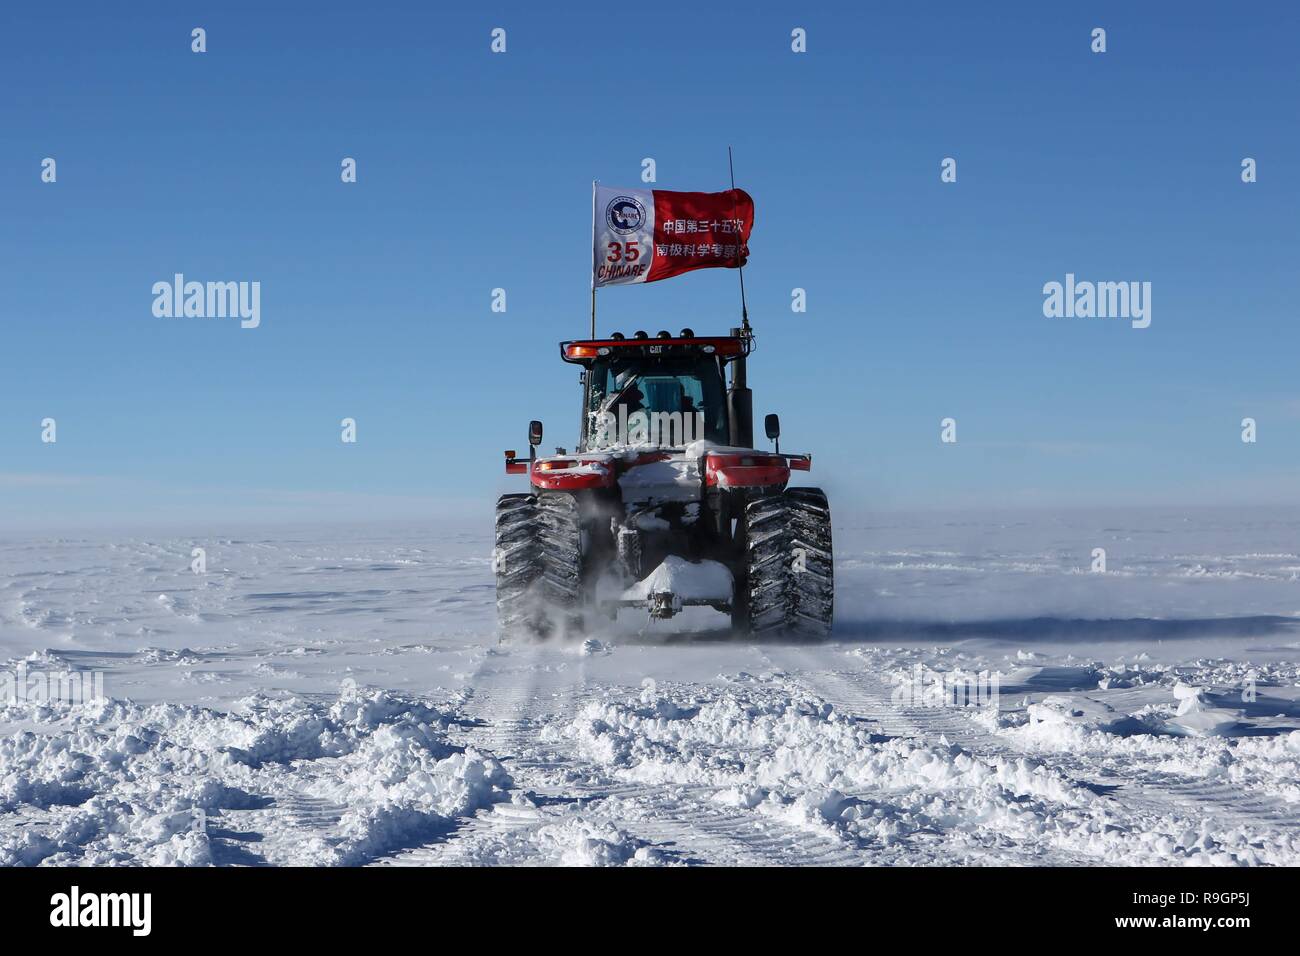 Beijing, China. 23rd Dec, 2018. A repaired snowmobile of China's research icebreaker Xuelong successfully gives a trial run in Antarctica, Dec. 23, 2018. Also known as the Snow Dragon, China's research icebreaker Xuelong carrying a research team set sail from Shanghai on Nov. 2, beginning the country's 35th Antarctic expedition which will last 162 days and cover 37,000 nautical miles (68,500 km). Credit: Liu Shiping/Xinhua/Alamy Live News Stock Photo